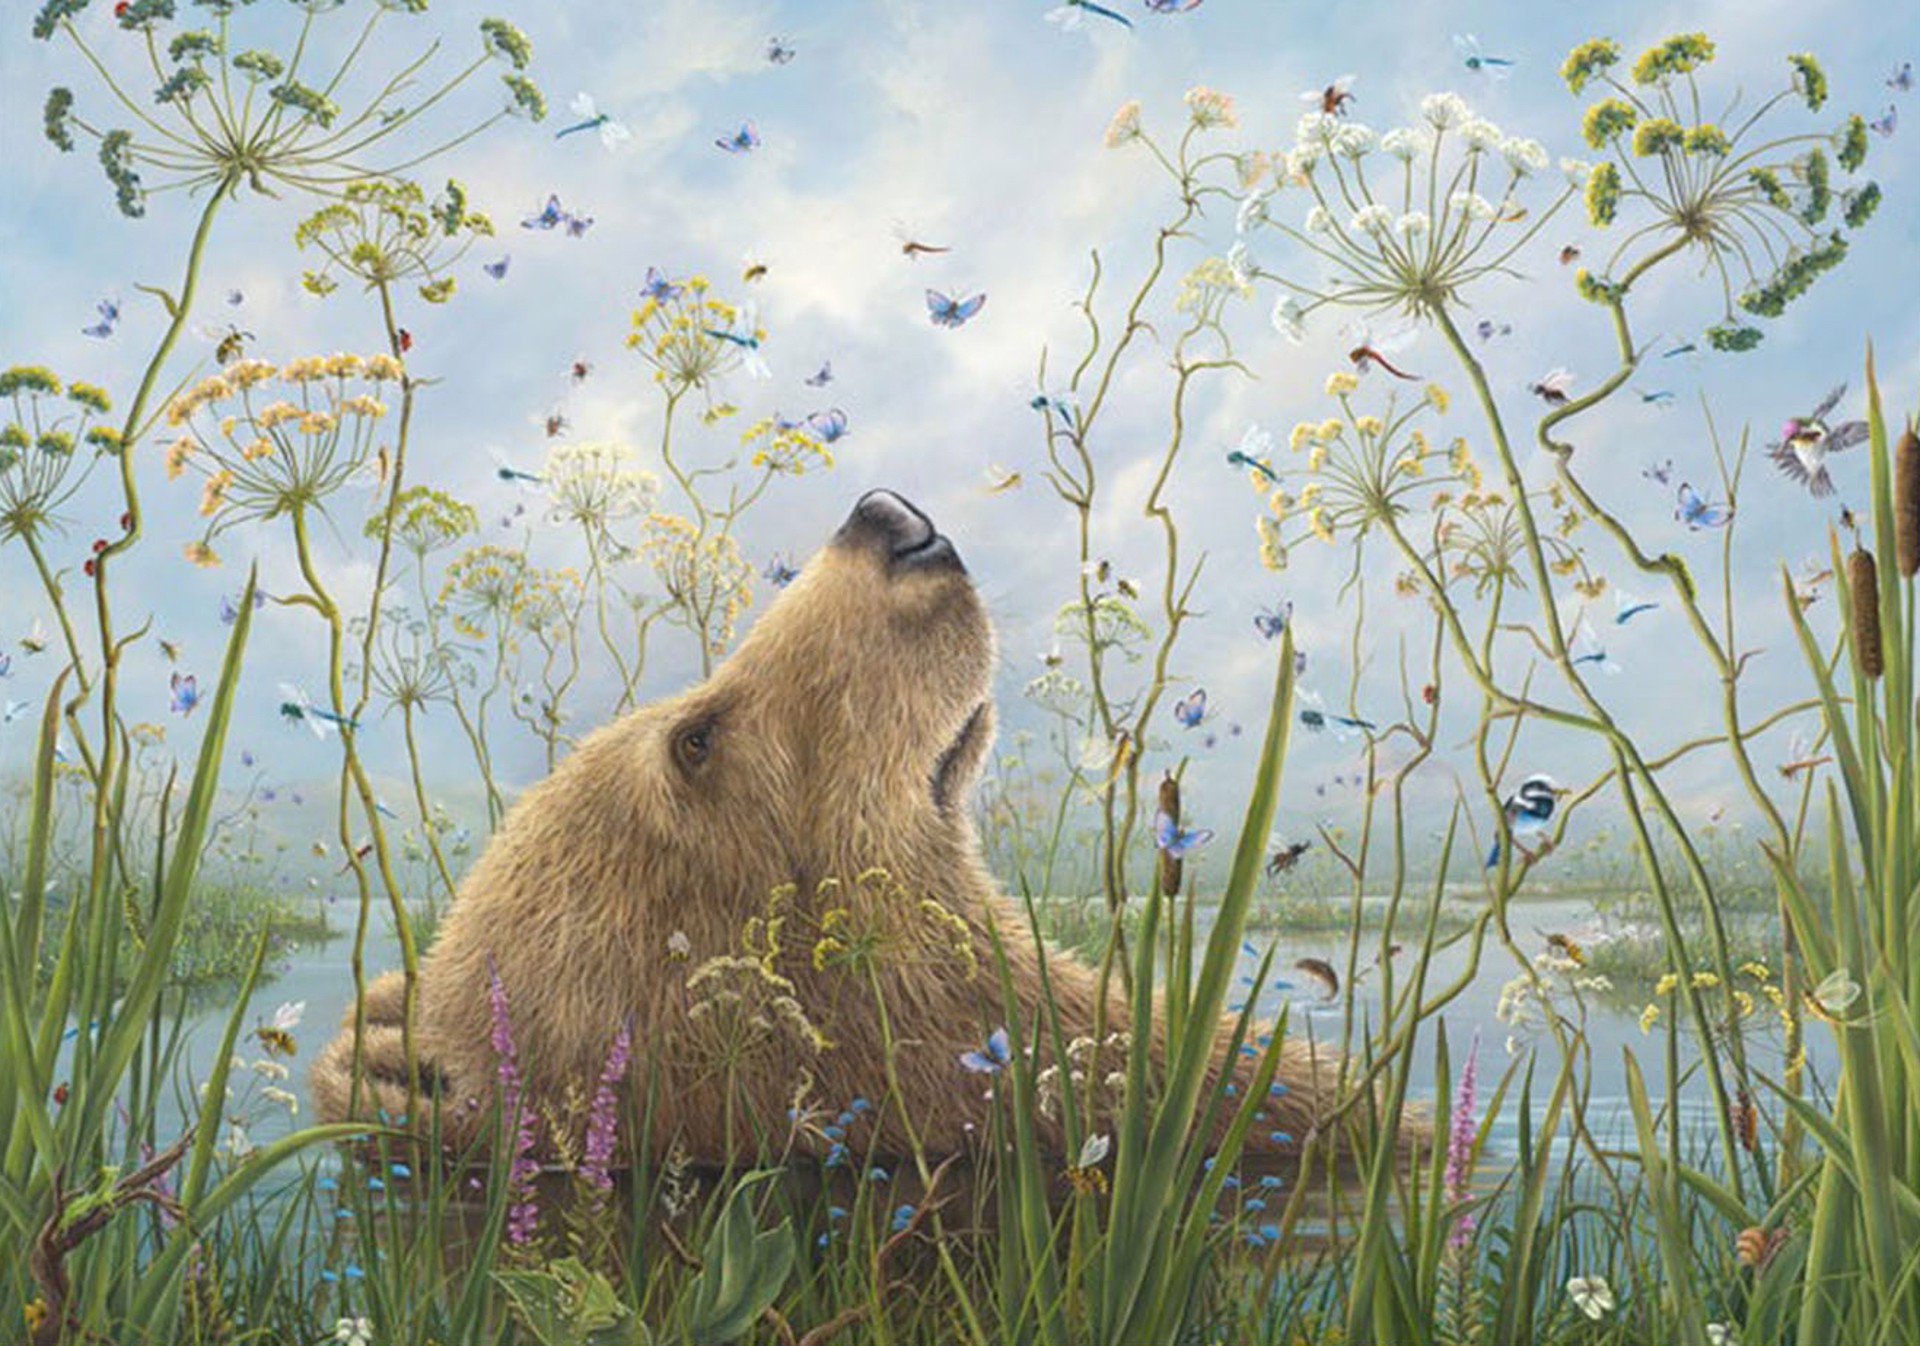 SOLD OUT - The Whole World (SOLD OUT) by Robert Bissell